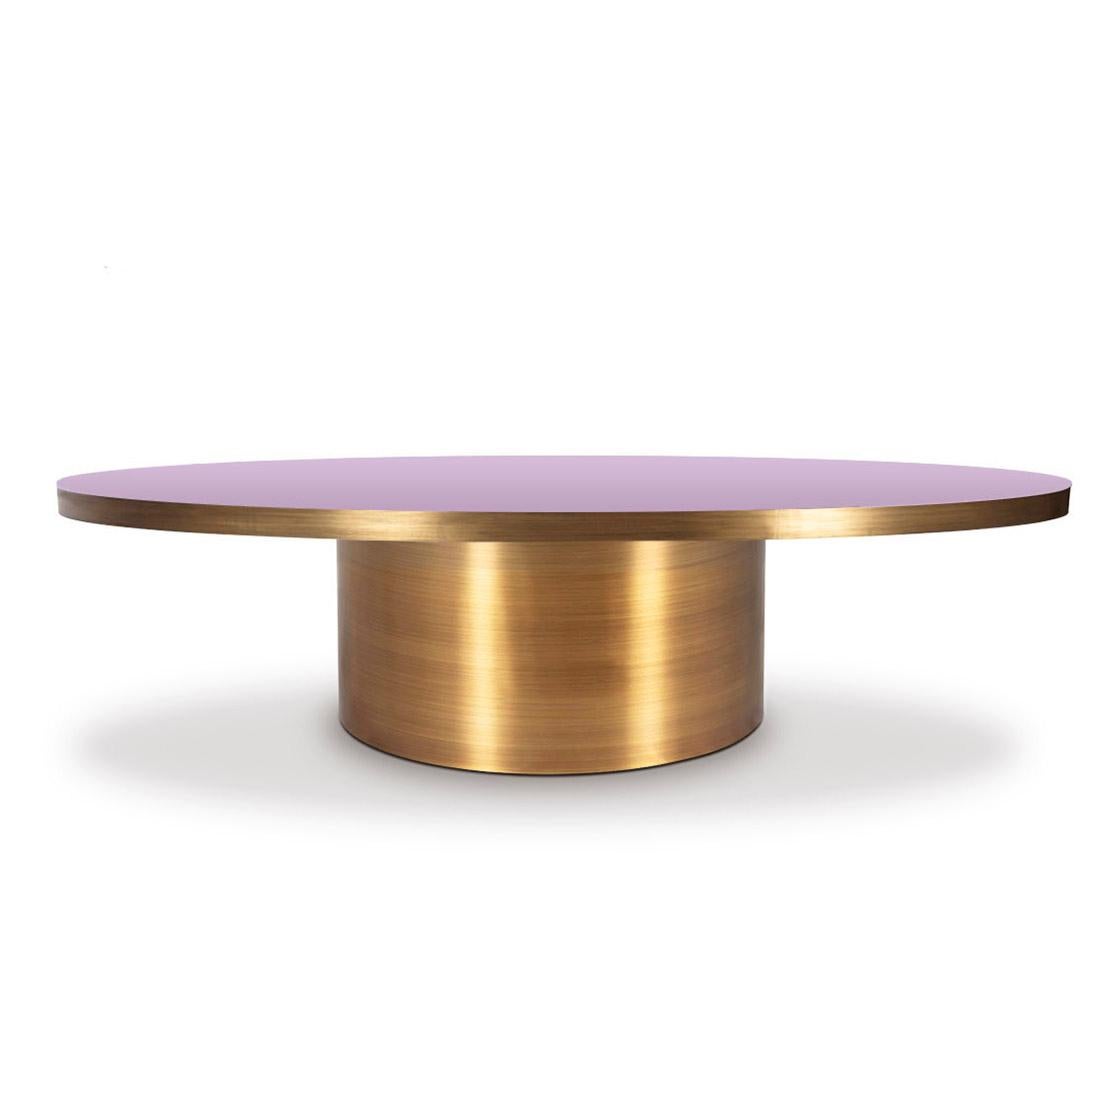 Rio center table is a truly unique piece of furniture that exudes tropical, sexy style. Crafted from the highest quality brass and your choice of lacquered wood, this dining table is built to last. The combination of the brass base and the lacquered